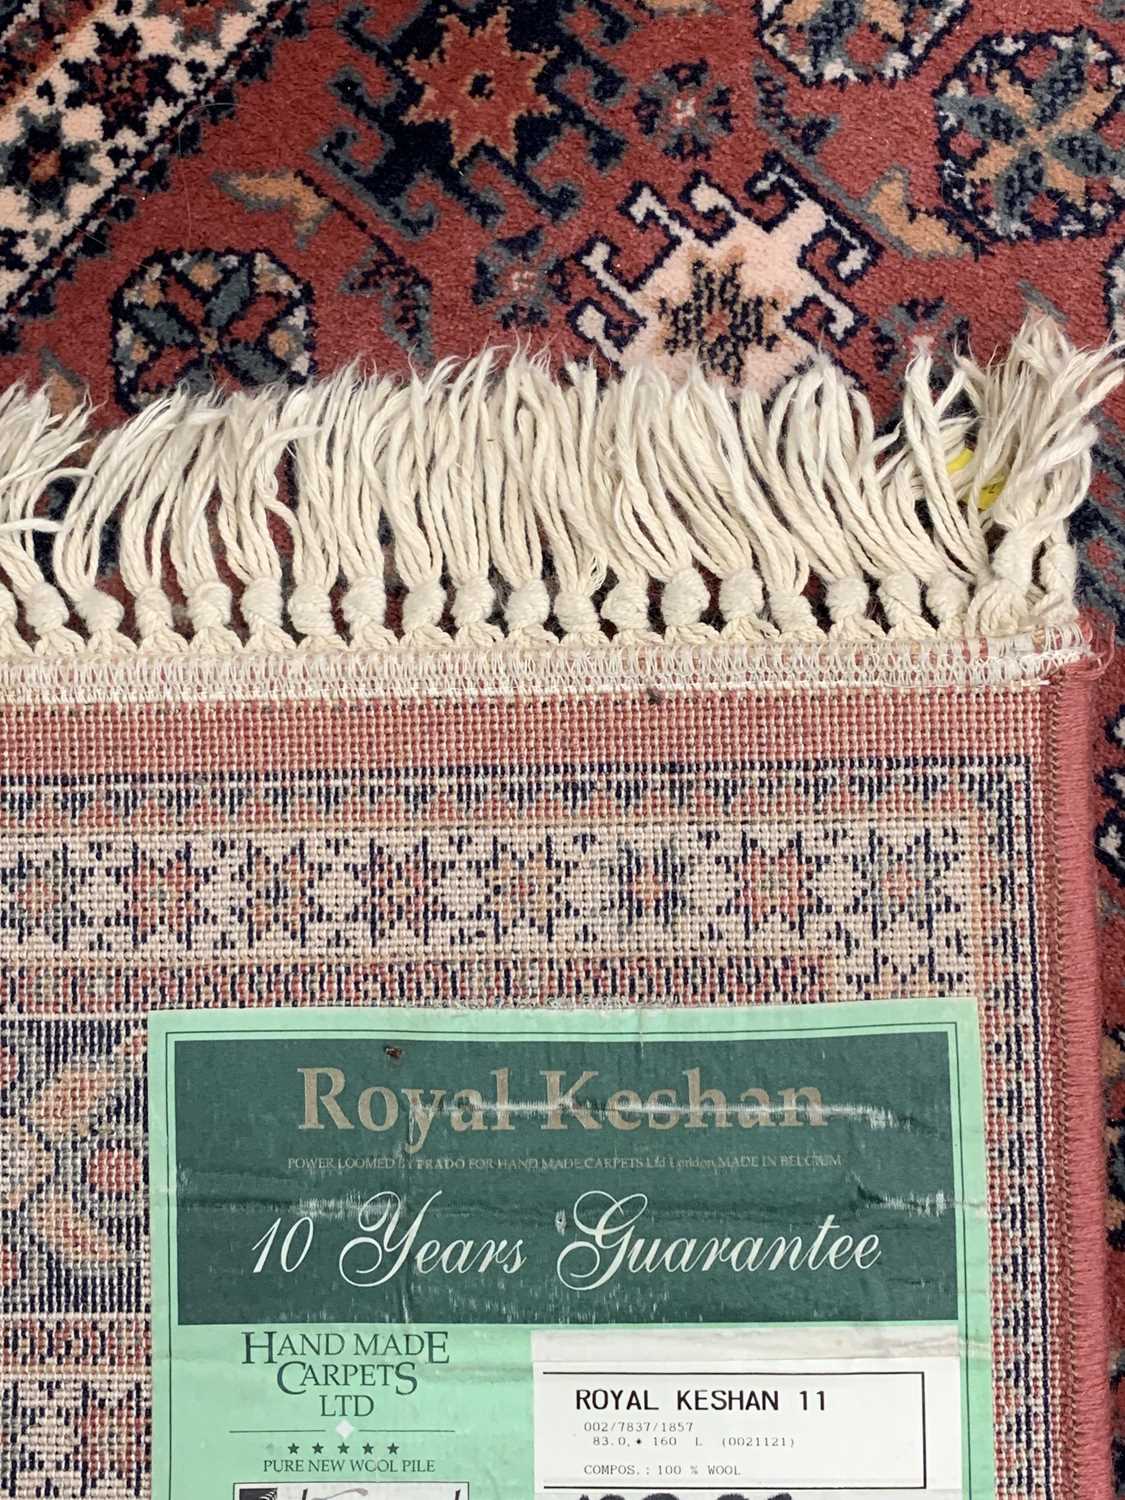 ROYAL KESHAN RUG - red ground with multi-border and Aztec/geometric design, 83 x 160cms - Image 2 of 2